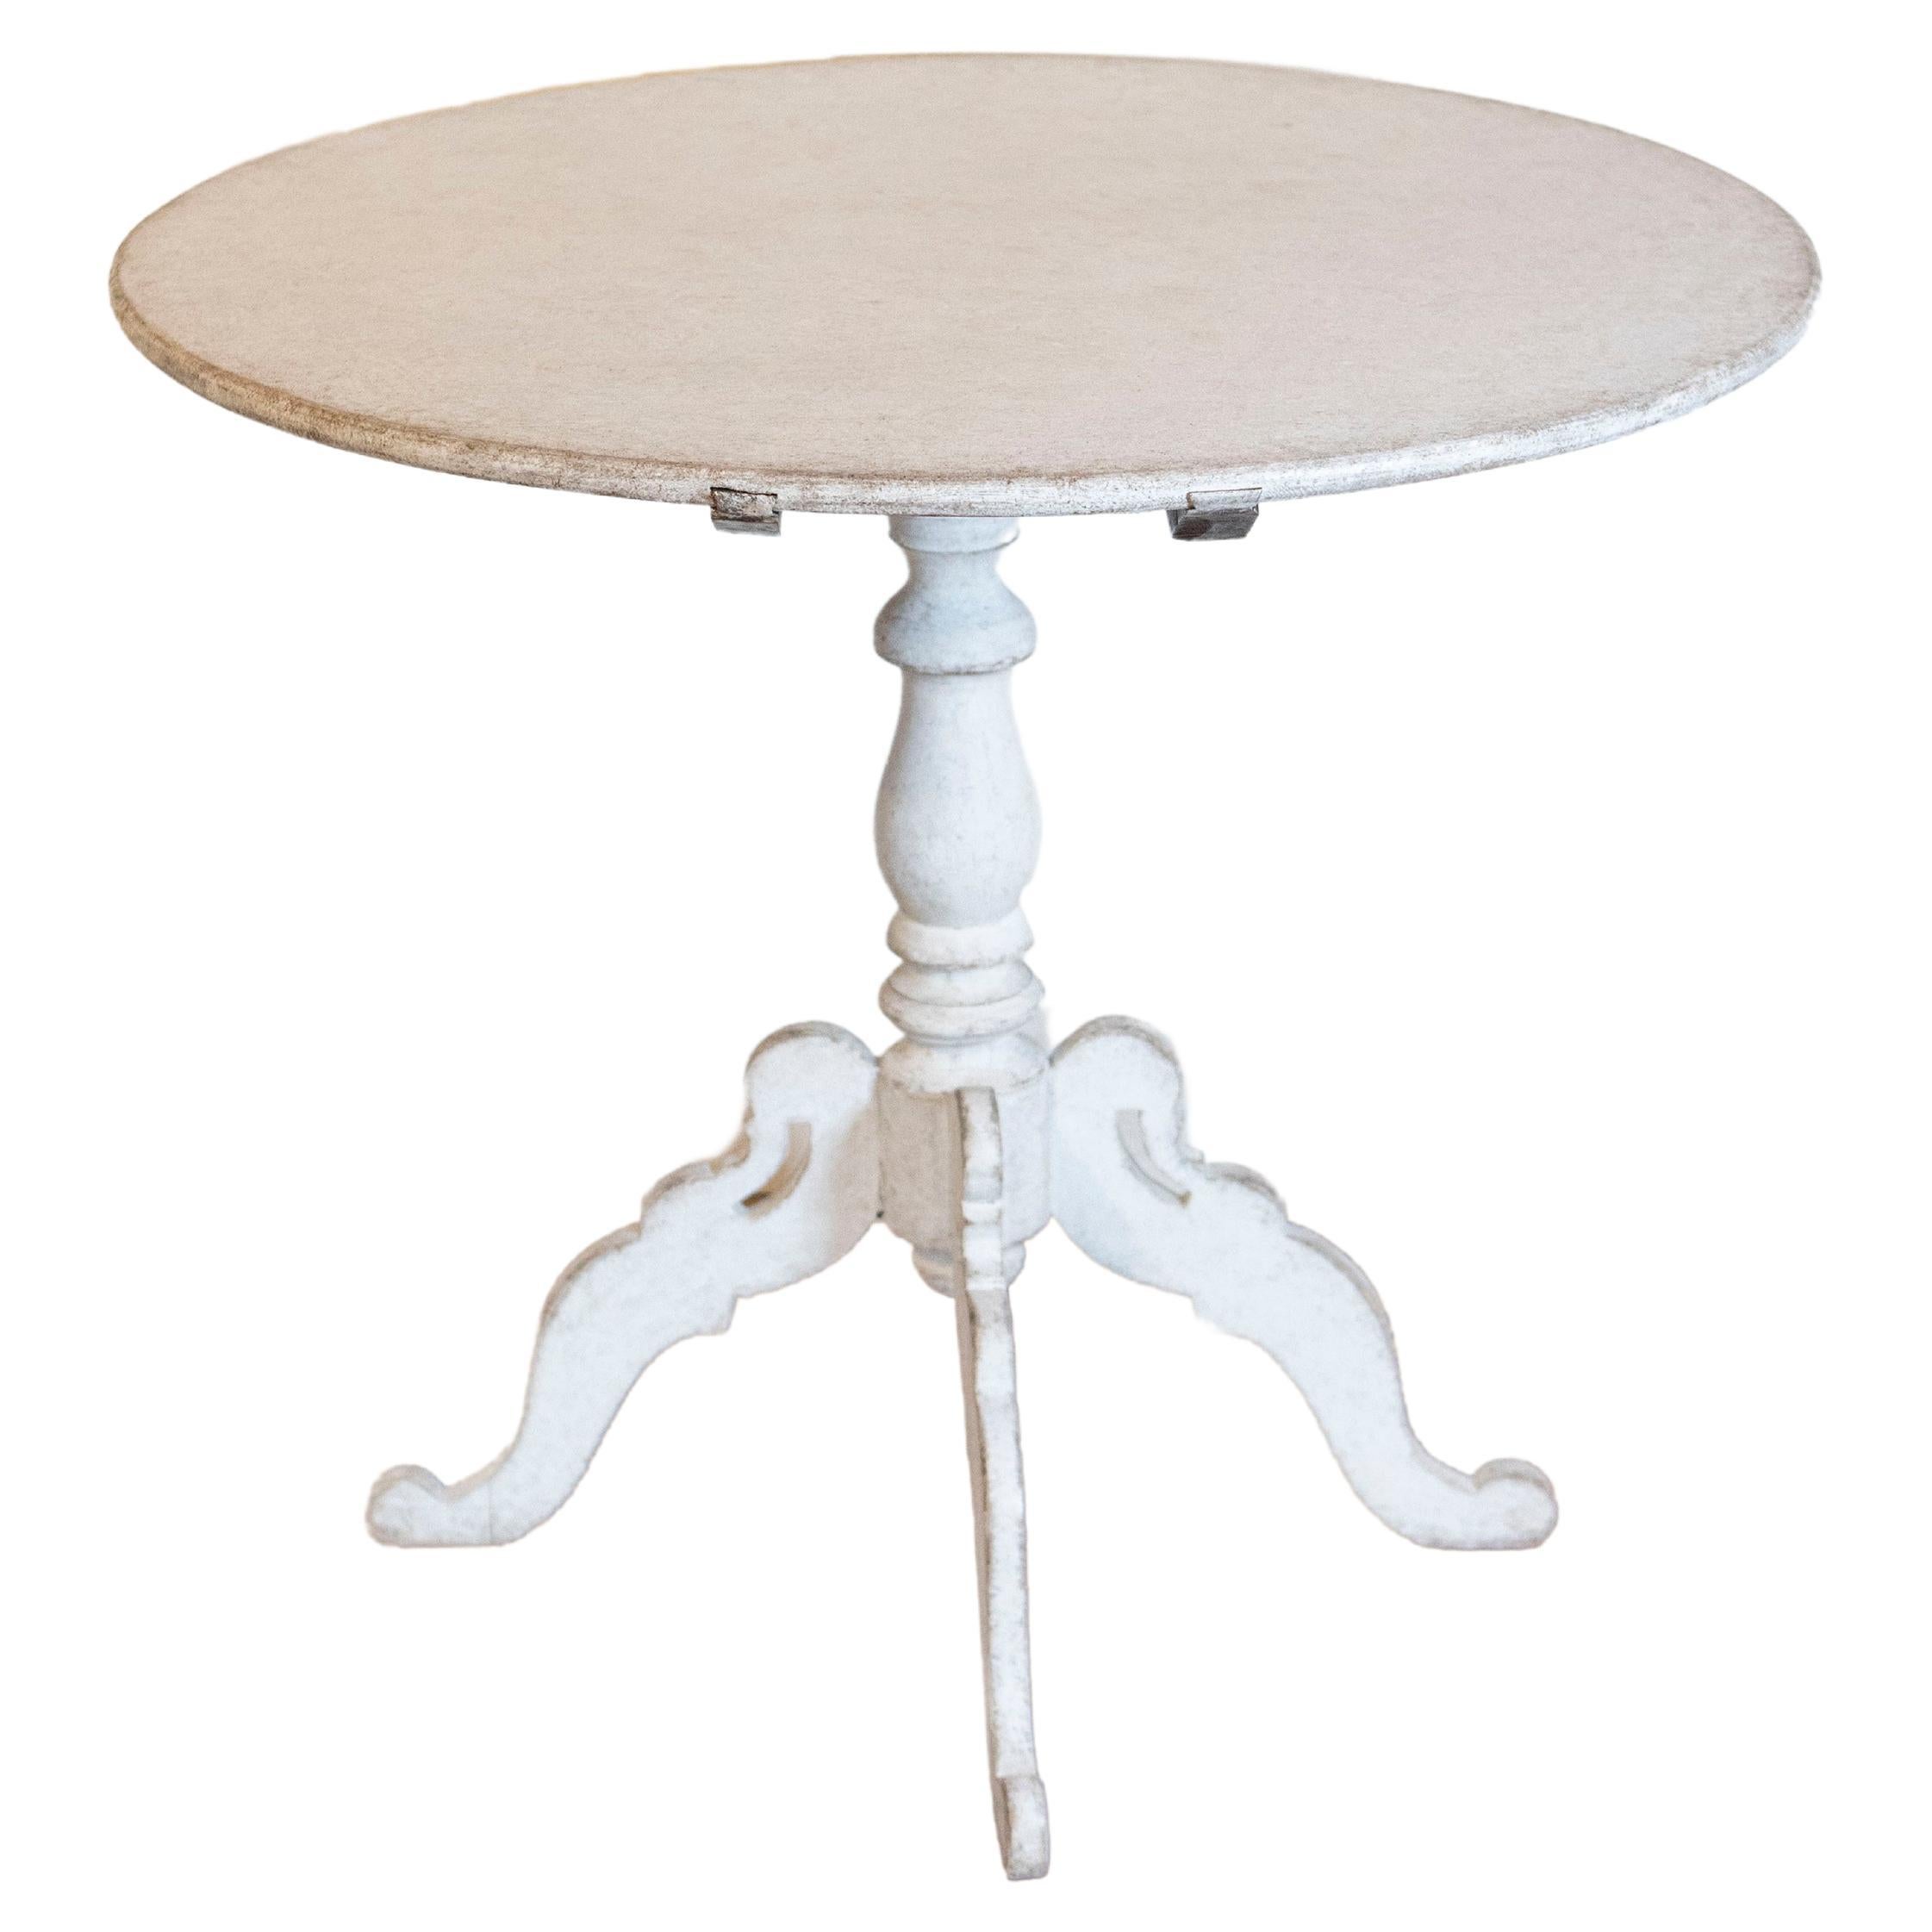 1860s Swedish Light Grey Painted Tilt-Top Table with Round Top and Carved Legs